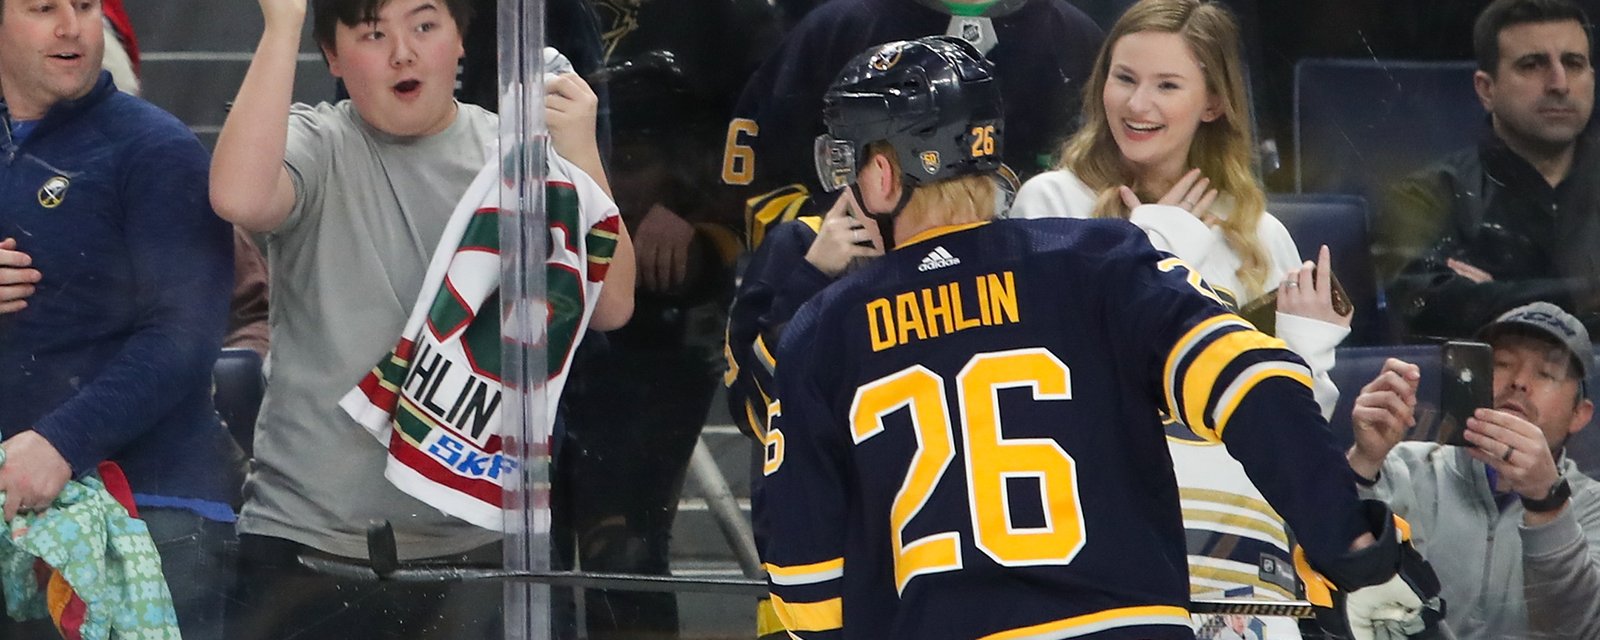 Relative of Sabres' employee tests positive for COVID-19 after attending game